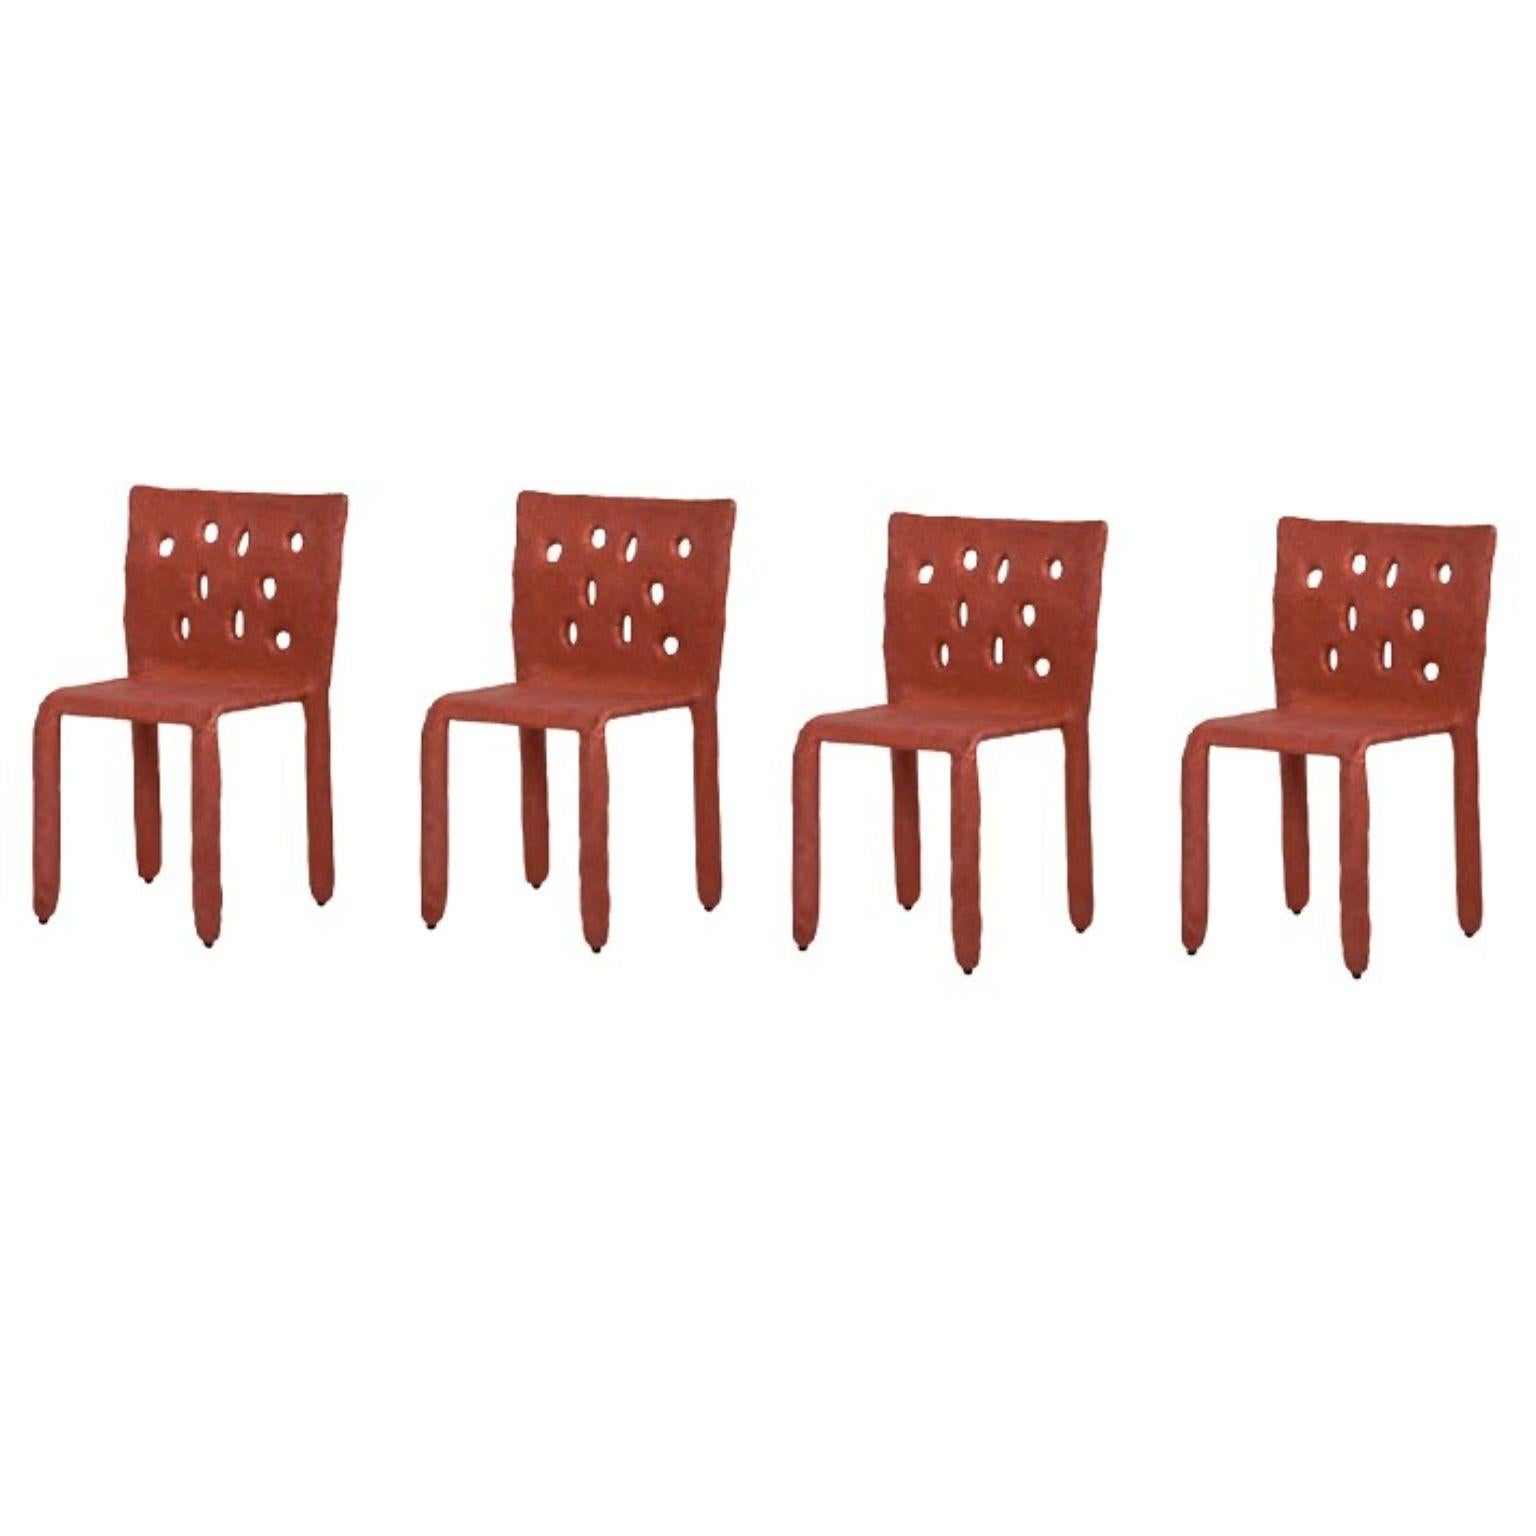 Set of 4 red sculpted Contemporary chairs by Faina
Design: Victoriya Yakusha
Material: steel, flax rubber, biopolymer, cellulose
Dimensions: height 82 x width 54 x legs depth 45 cm
 Weight: 15 kilos.

Made in the style of ethnic minimalism,